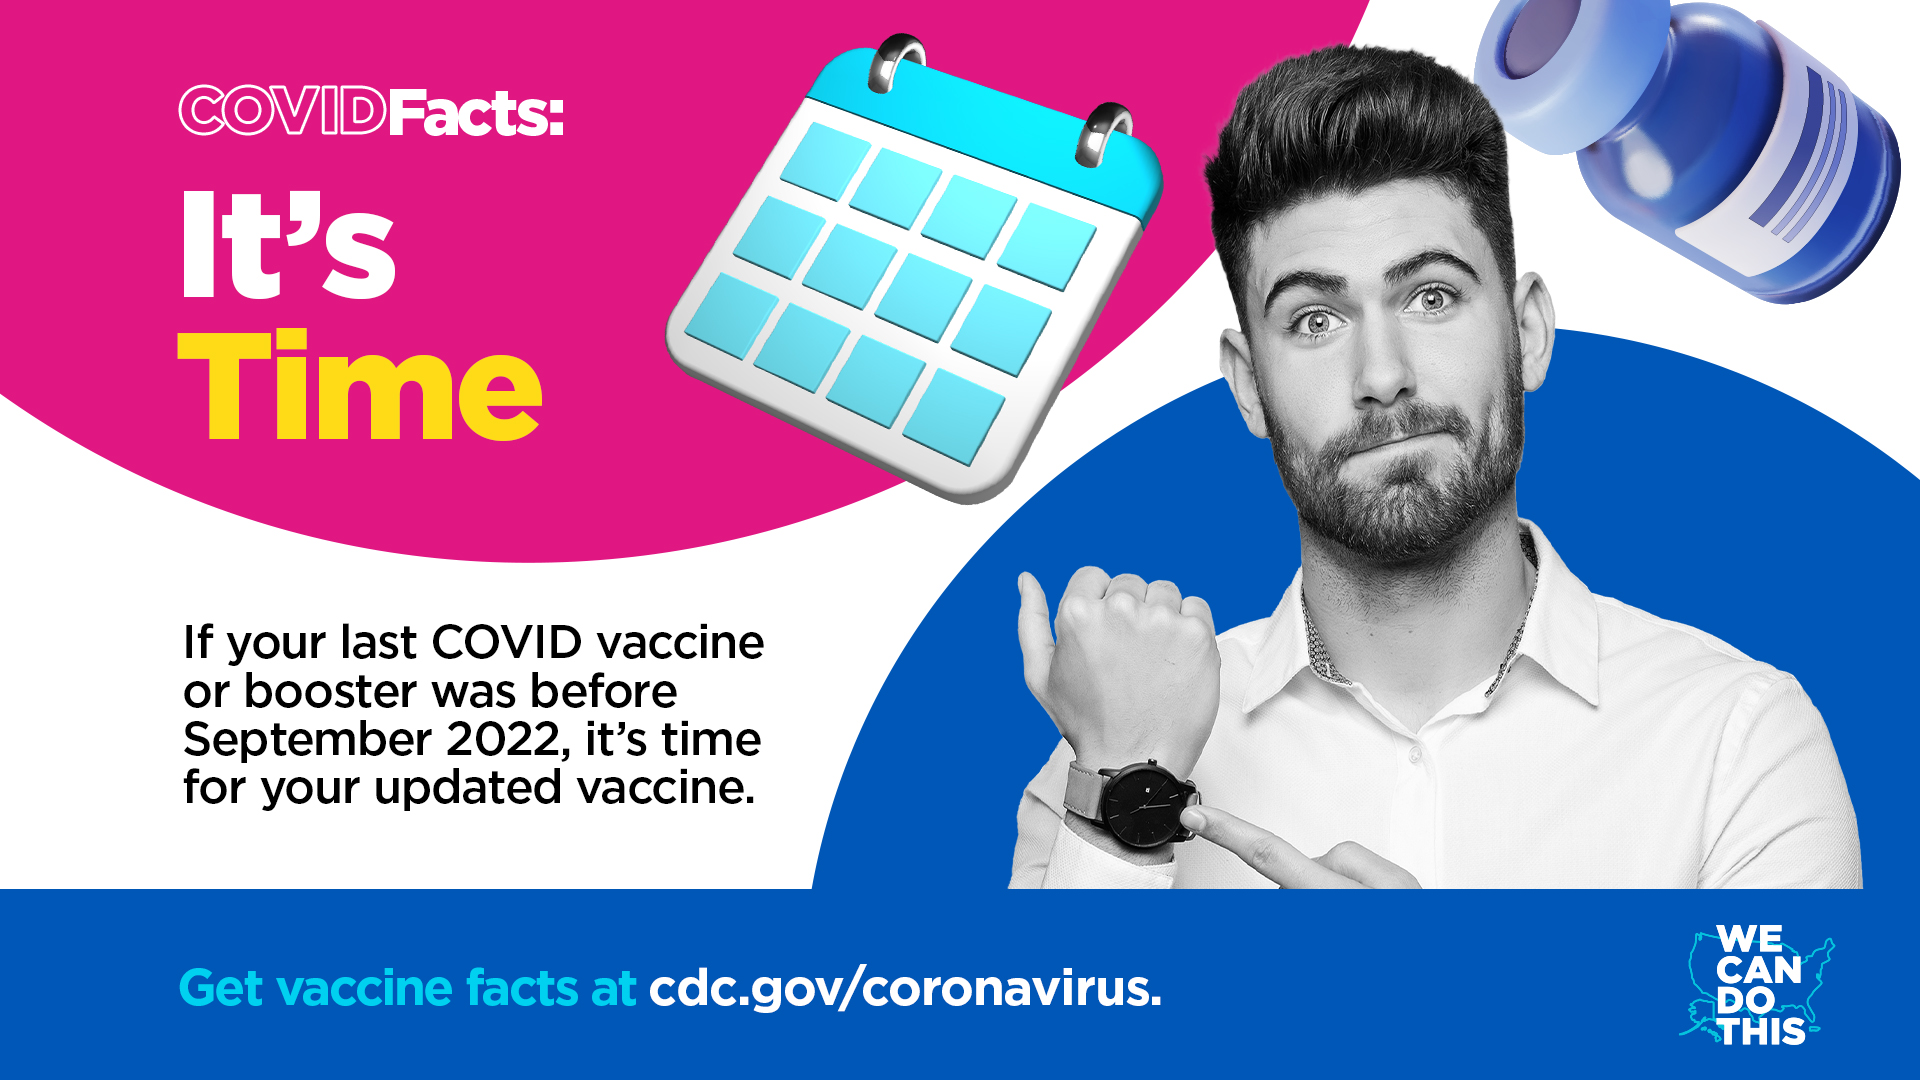 An adult man points to his watch. Text reads, "COVID Facts: It’s Time. If your last COVID vaccine or booster was before September 2022, it’s time for your updated vaccine. Get vaccines facts at cdc.gov/coronavirus"